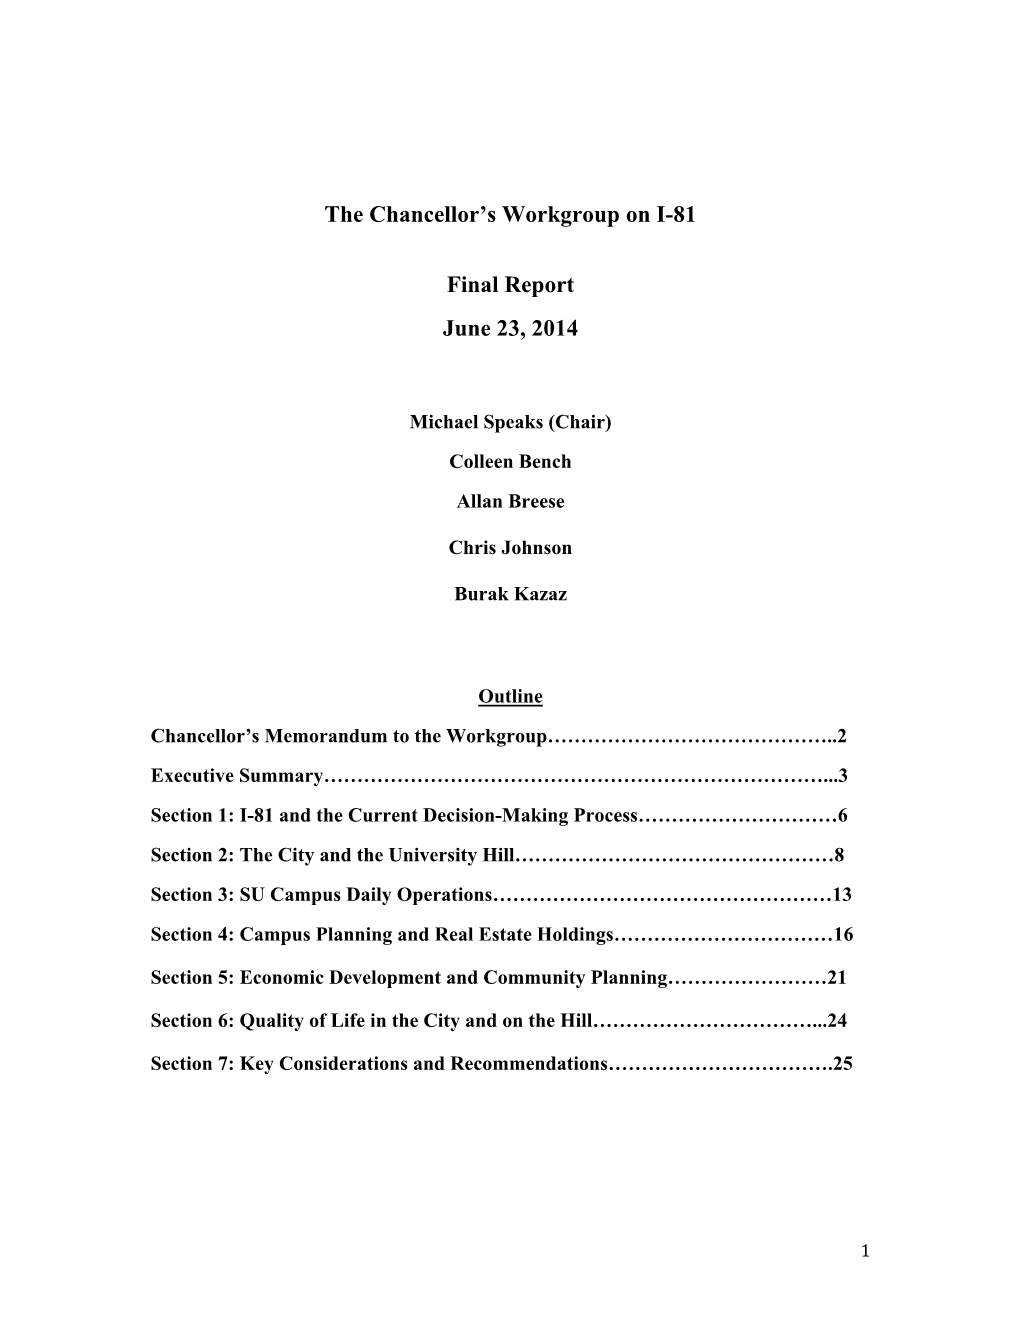 The Chancellor's Workgroup on I-81 Final Report June 23, 2014